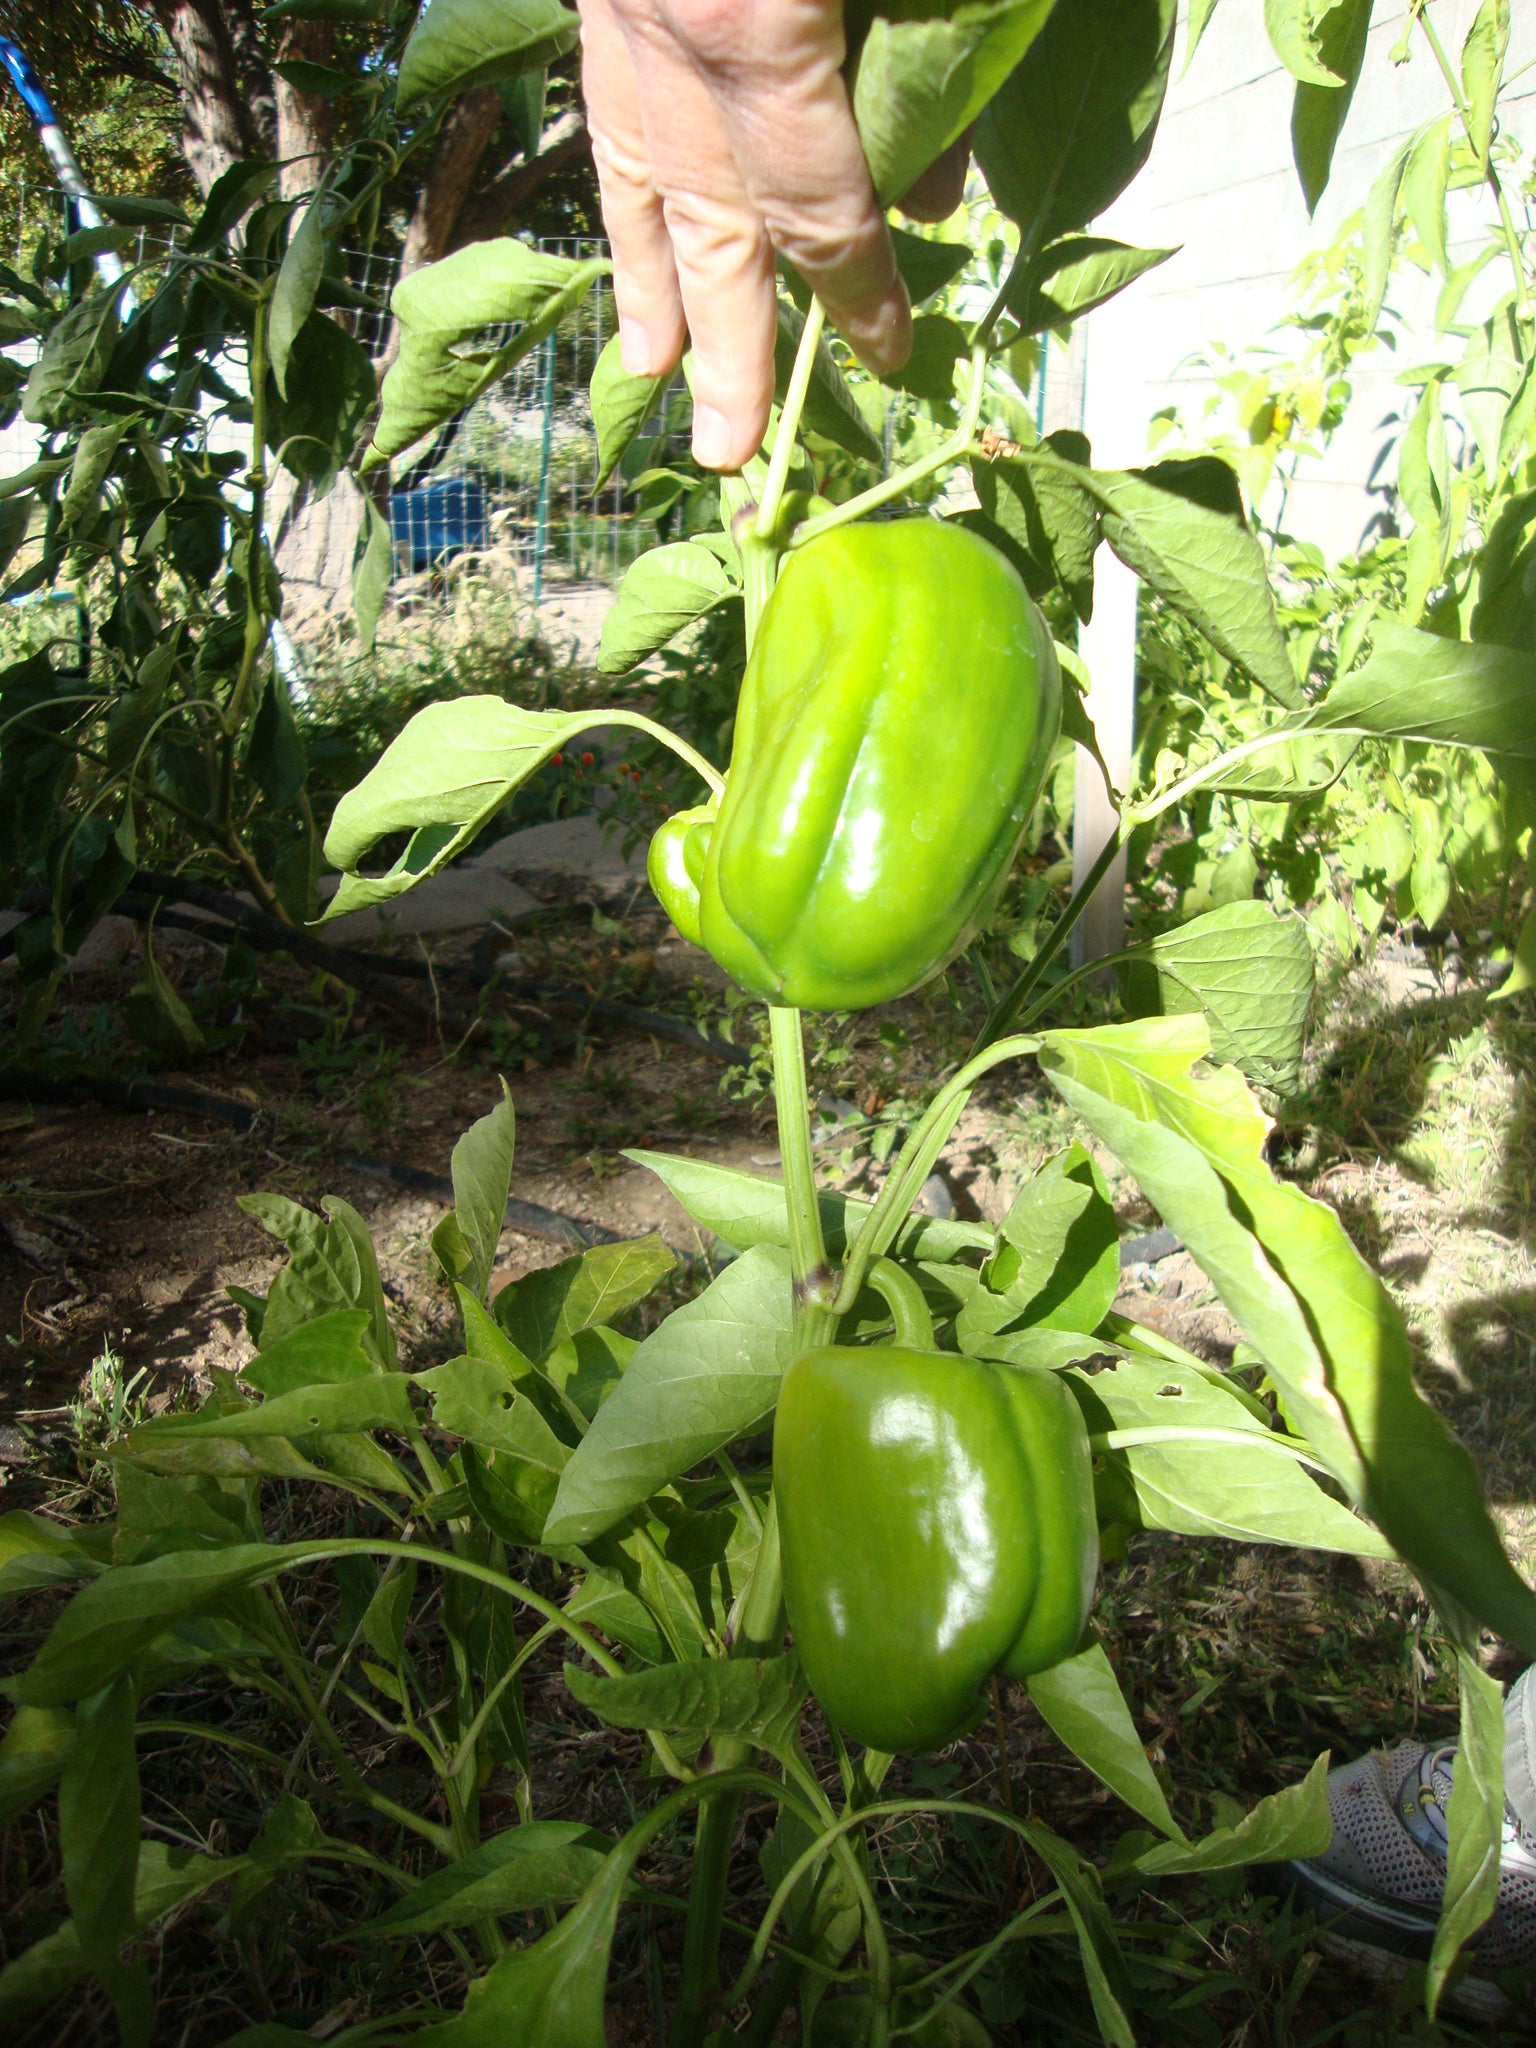 Top 10 questions about Bell Peppers Answered – Sandia Seed Company